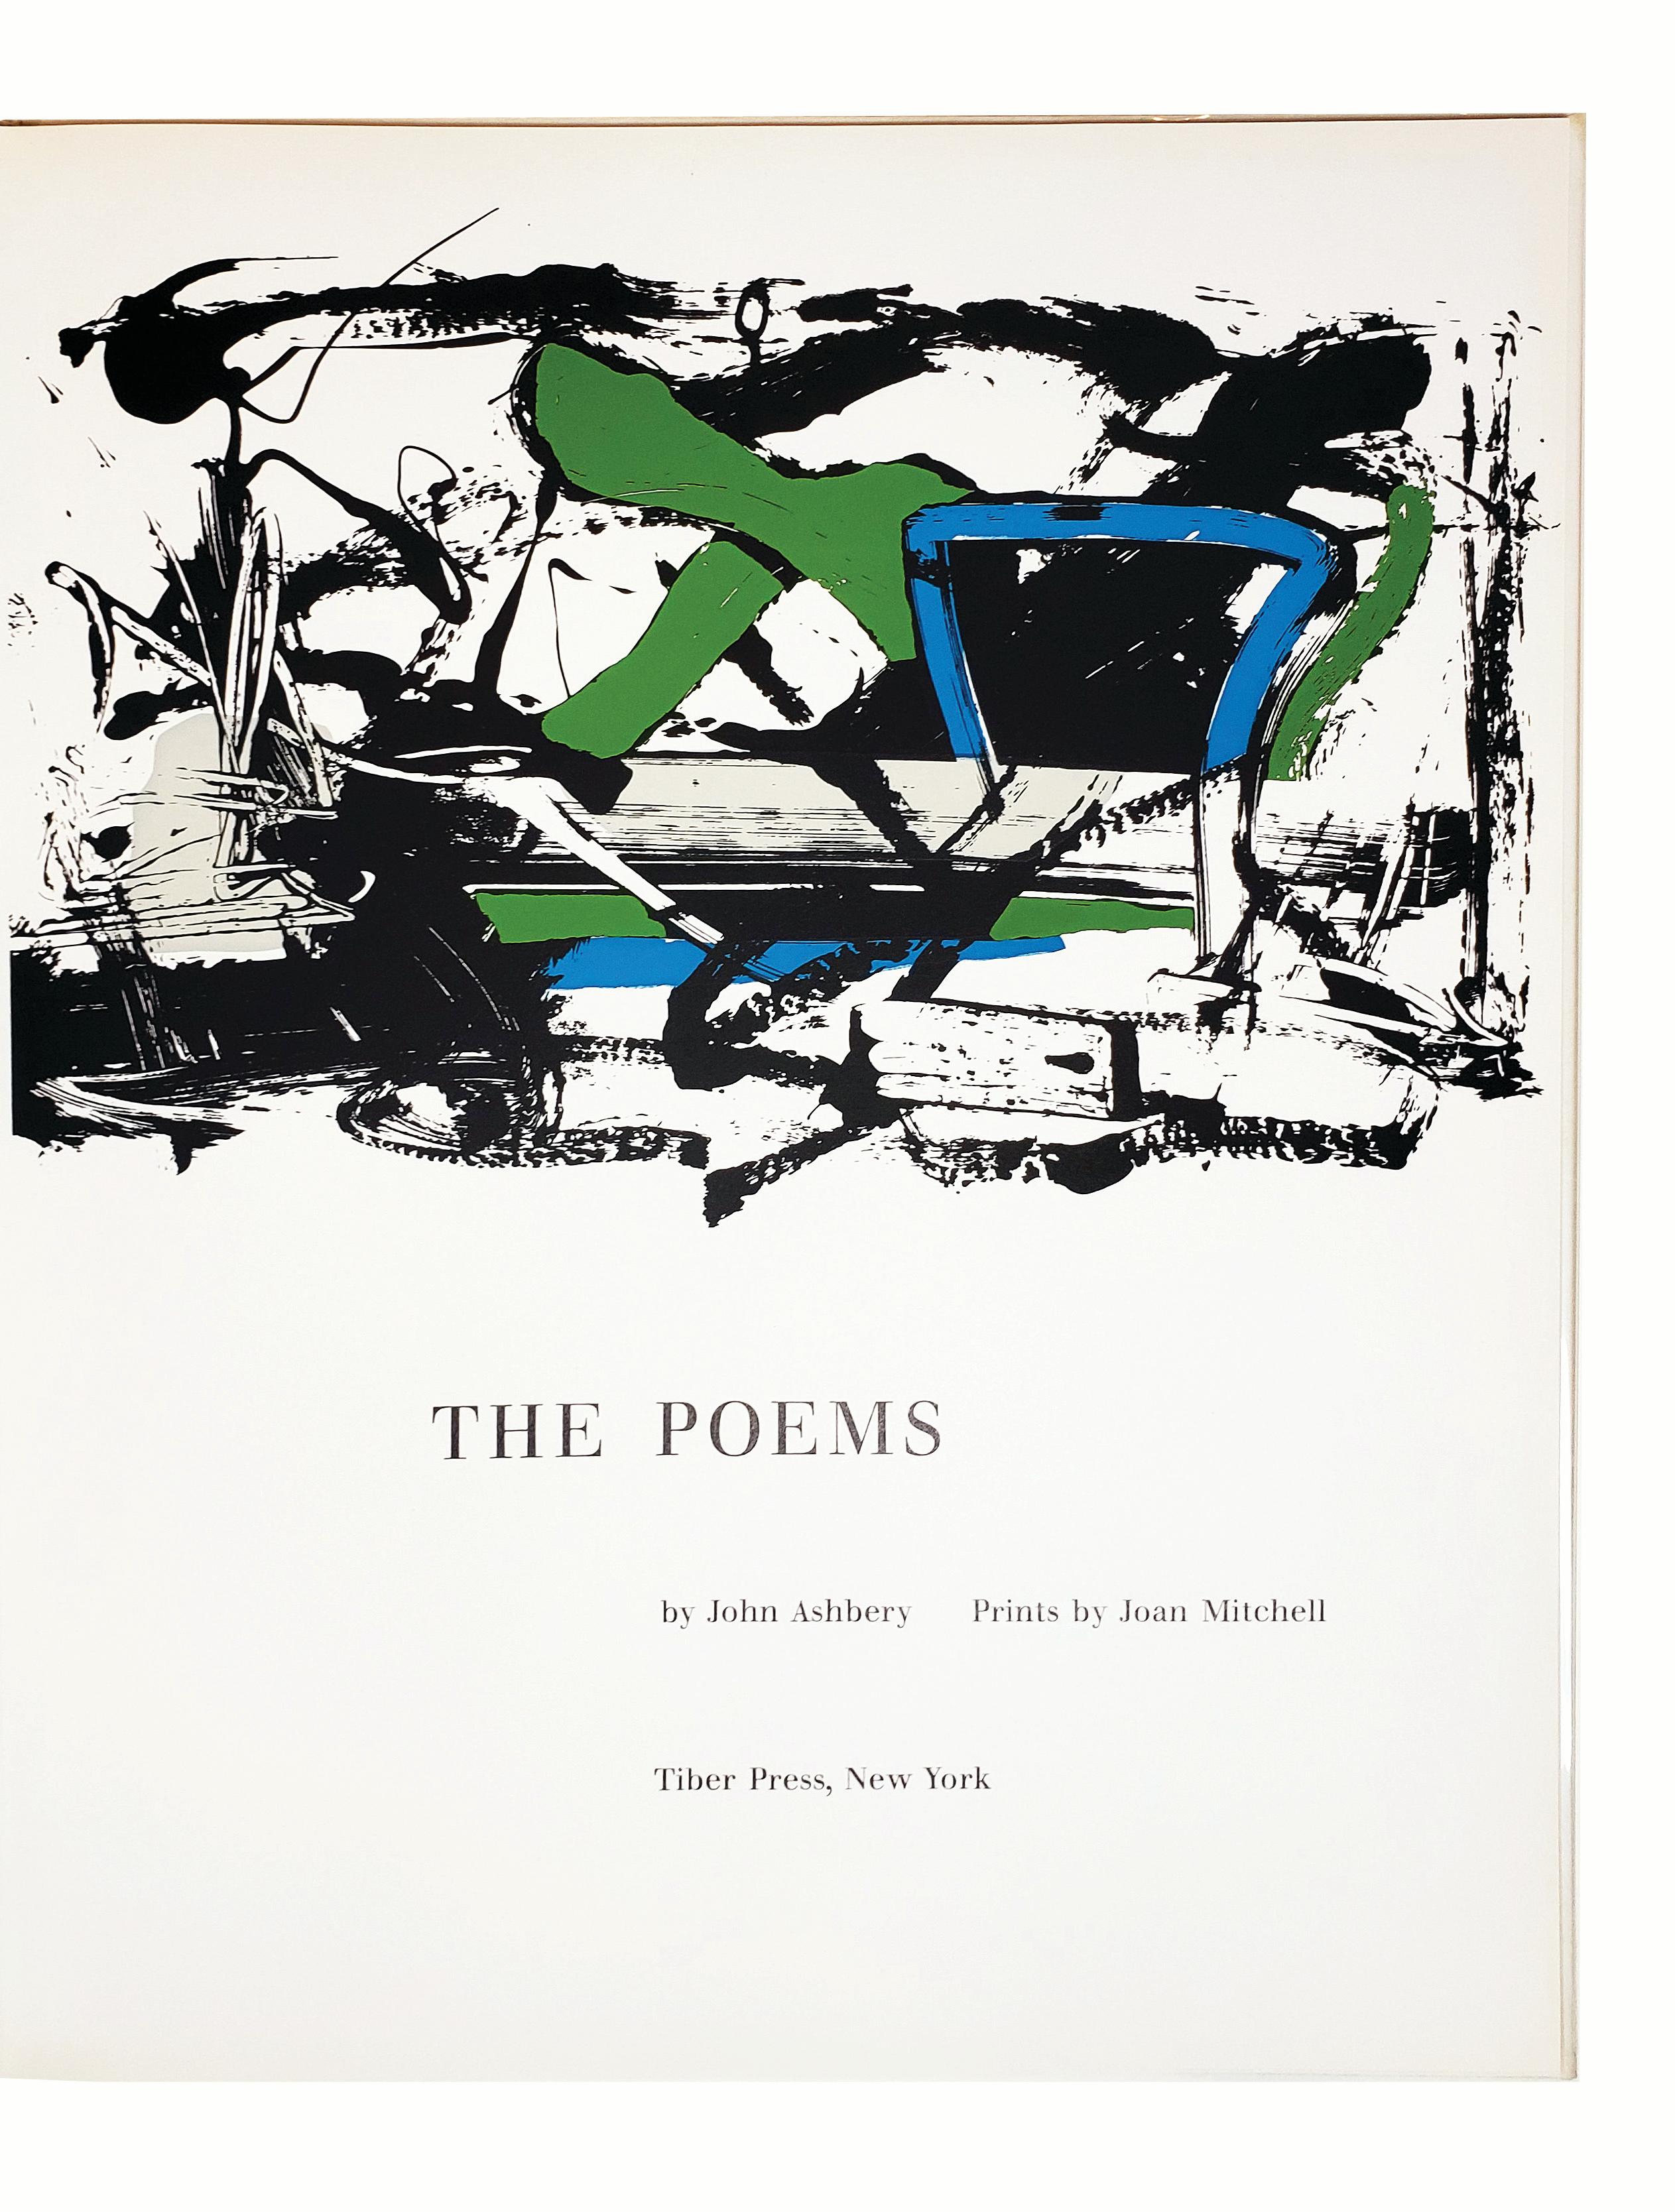  4 Volumes.  1. John Ashbery. The Poems. With 4 prints by Joan Mitchell.  2. Frank O'Hara. Odes. With 4 prints by Michael Goldberg.  3. Kenneth Koch. Permanently. With 4 prints by Alfred Leslie.  4.  James Schuyler. Salute. With 4 prints by Grace